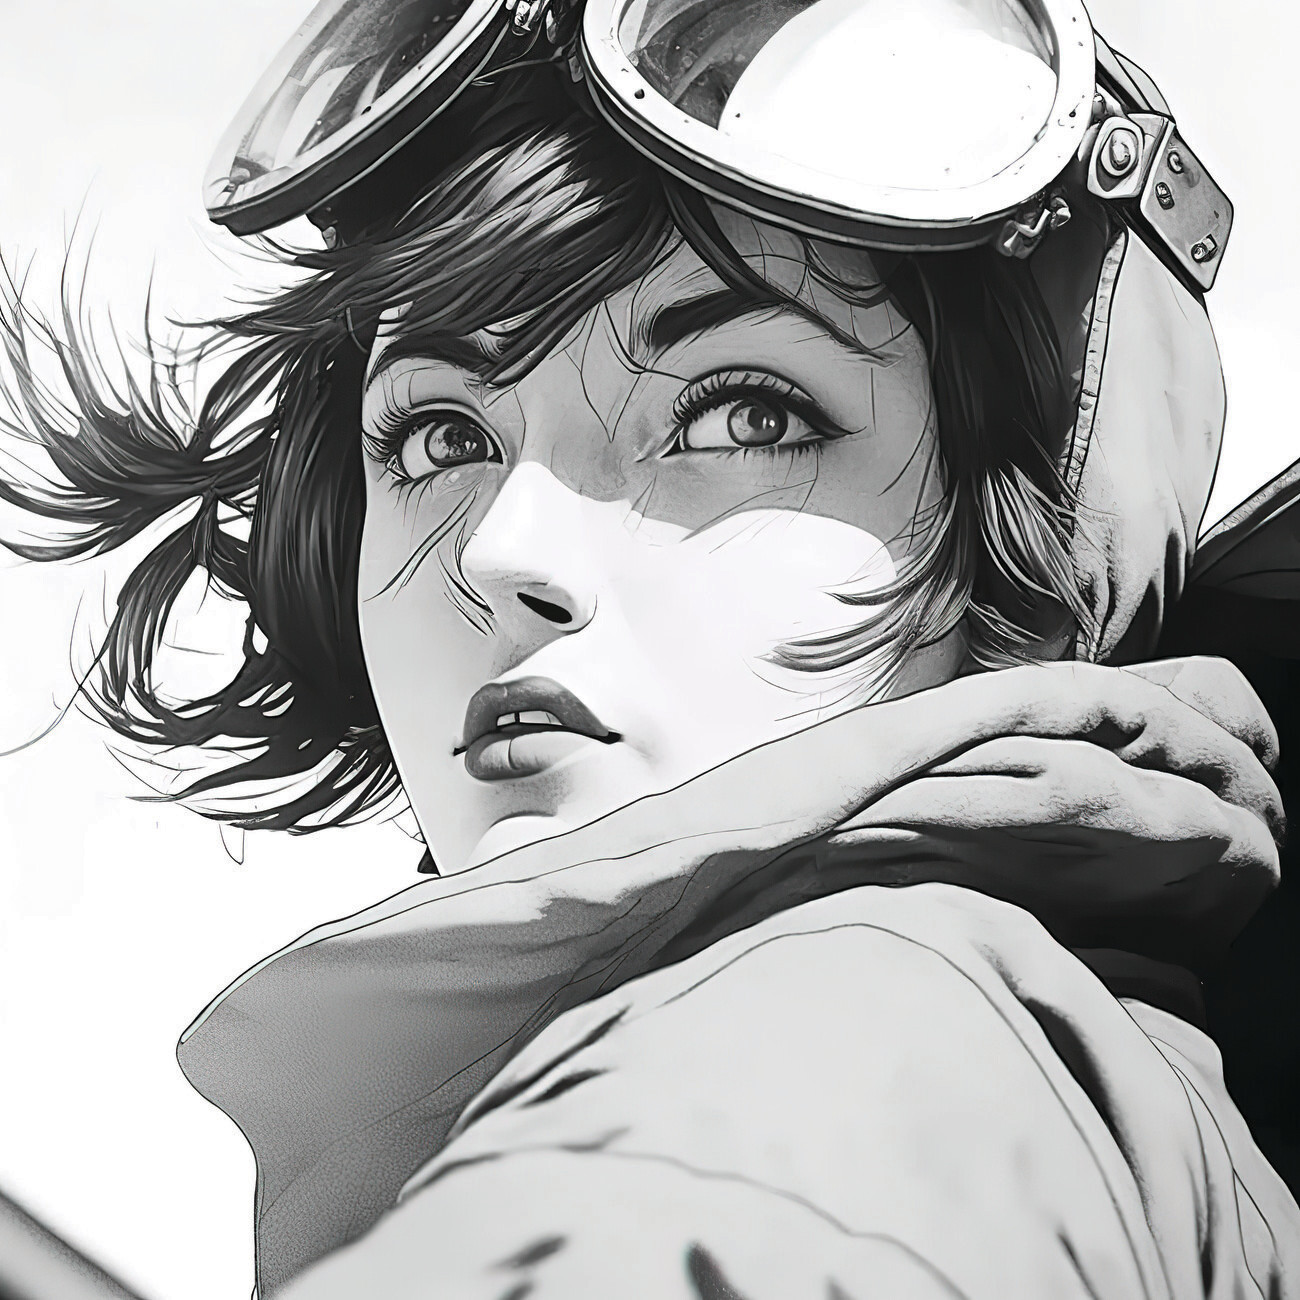 Anime Helicopter Pilot Girl by AbstractIntuitions on DeviantArt